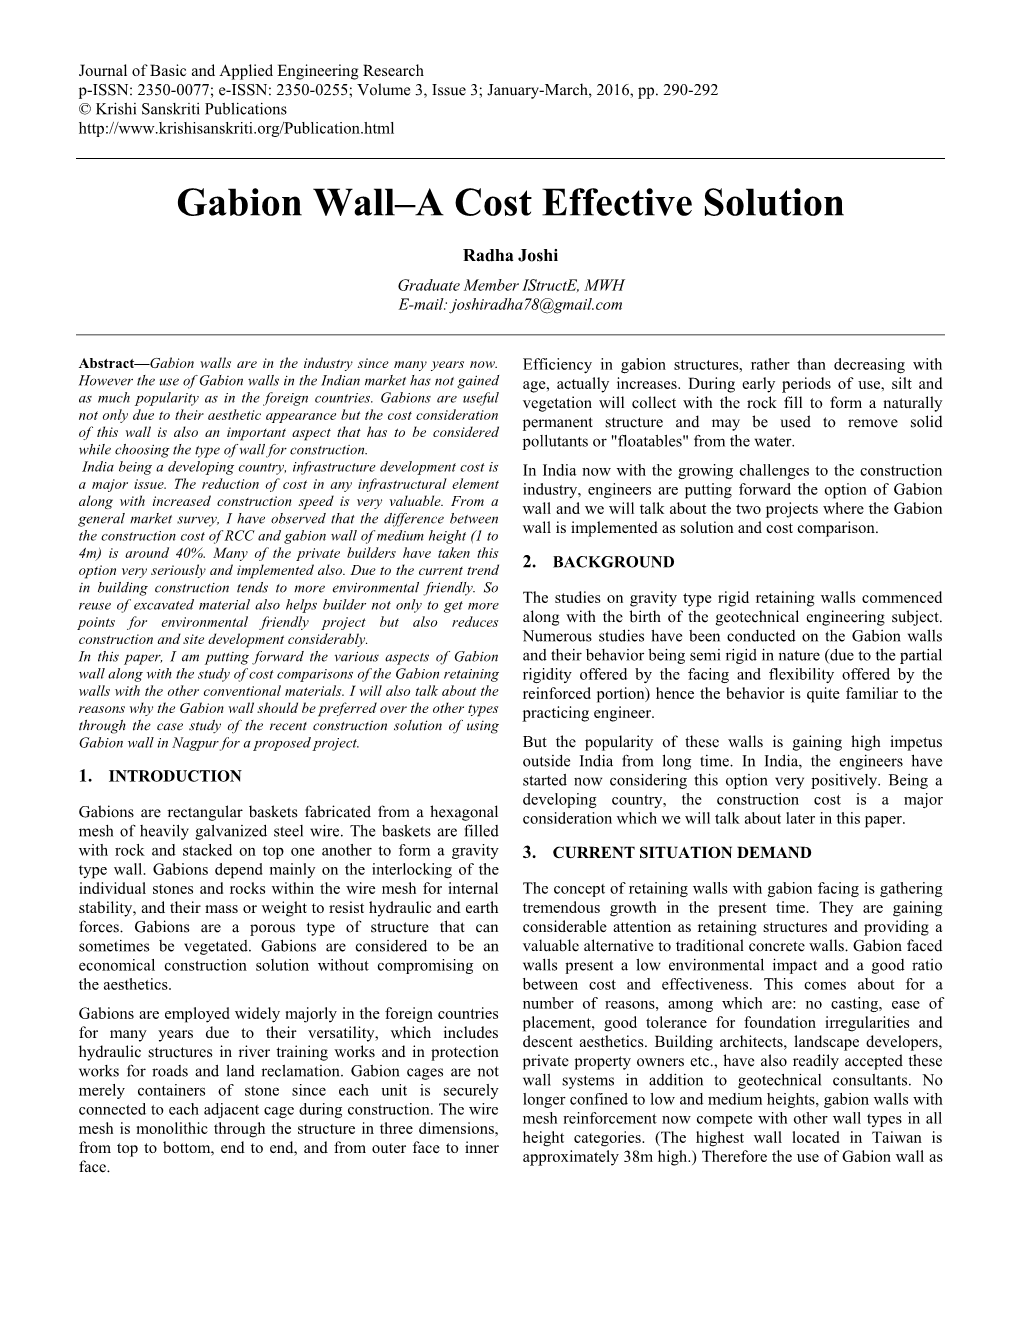 Gabion Wall–A Cost Effective Solution